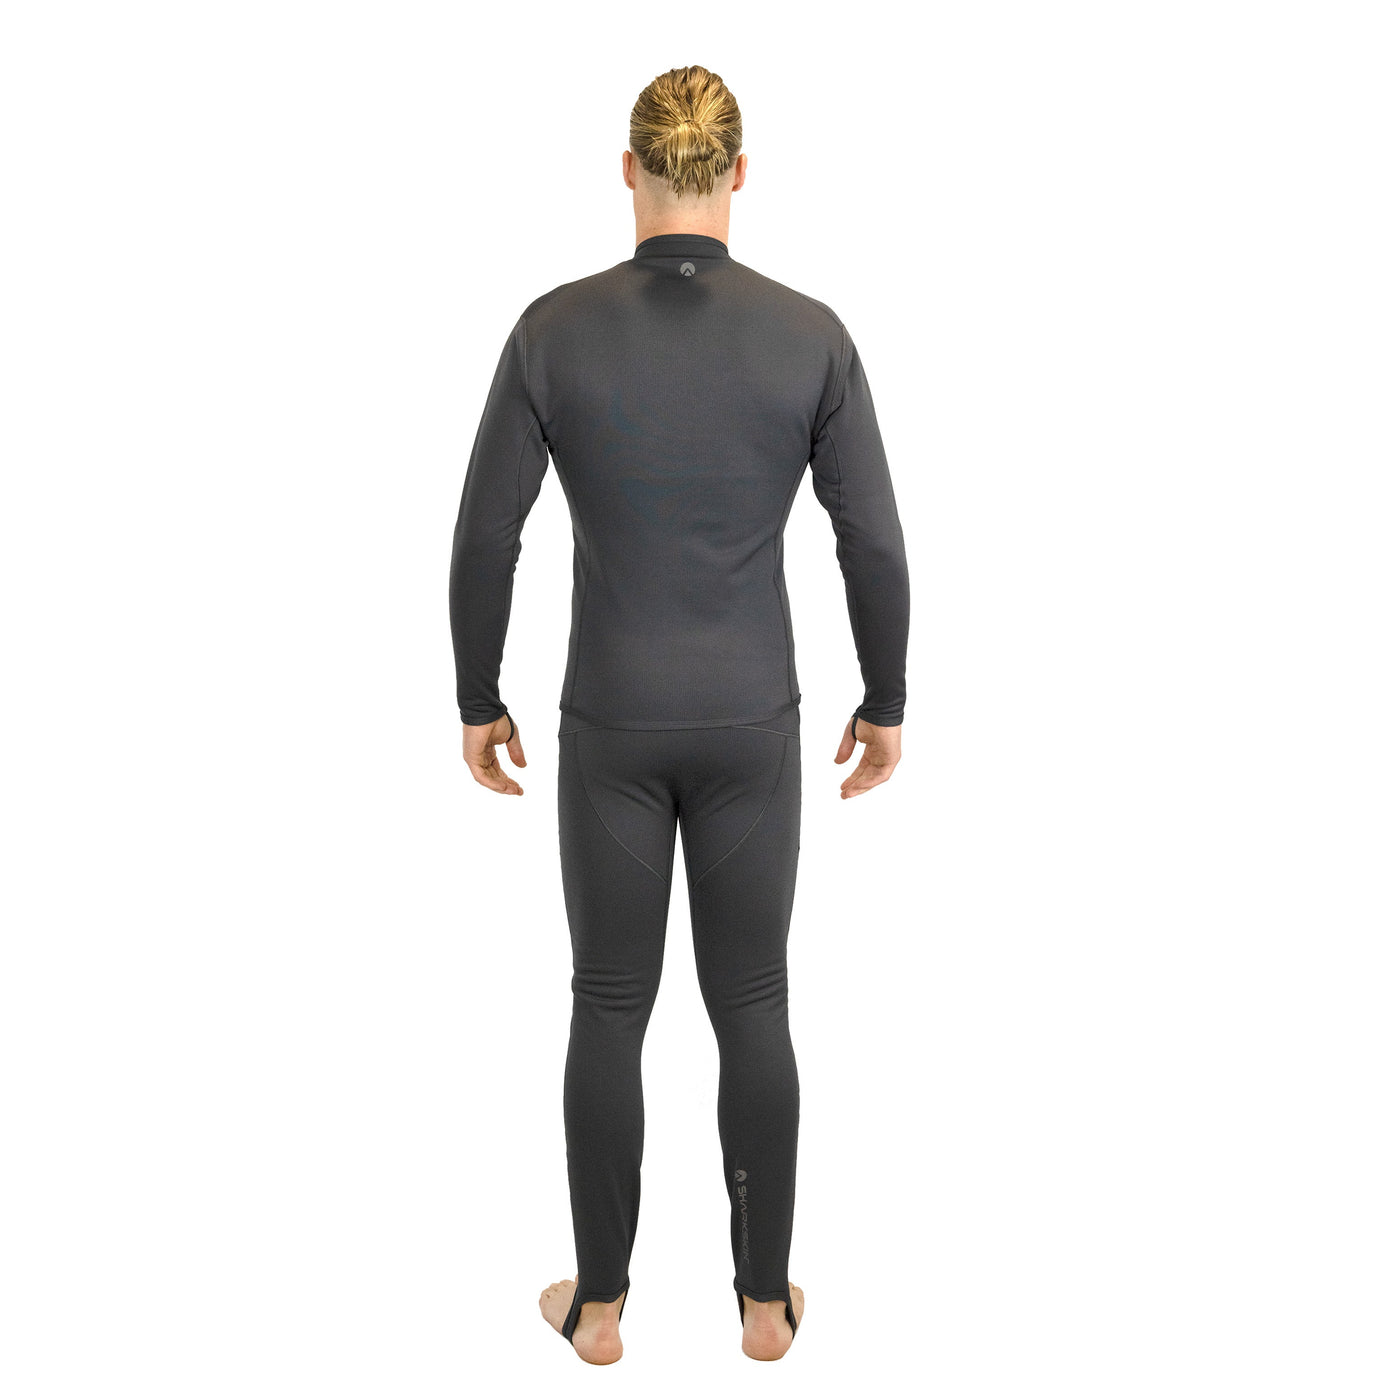 T2 CHILLPROOF TOP AND BOTTOMS PACKAGE - MENS